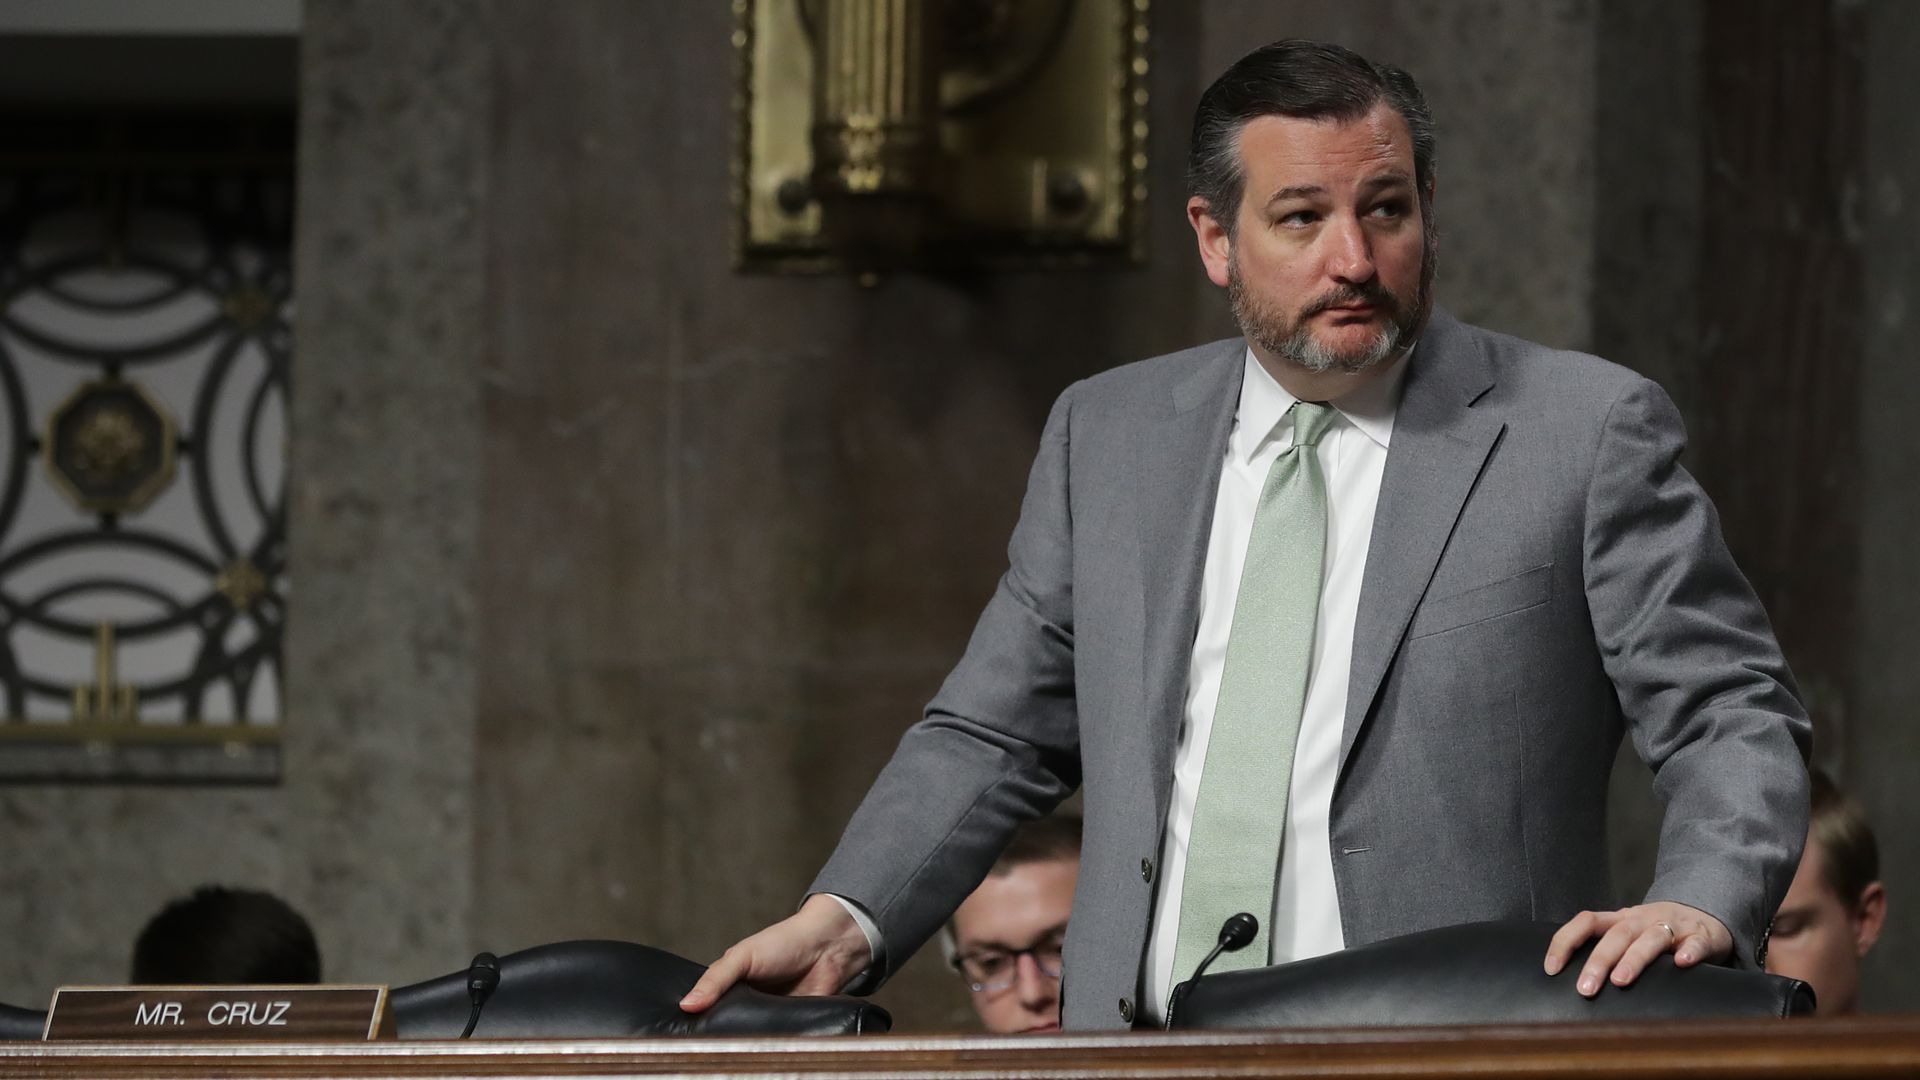 Ted Cruz stands at a hearing in a gray suit. 